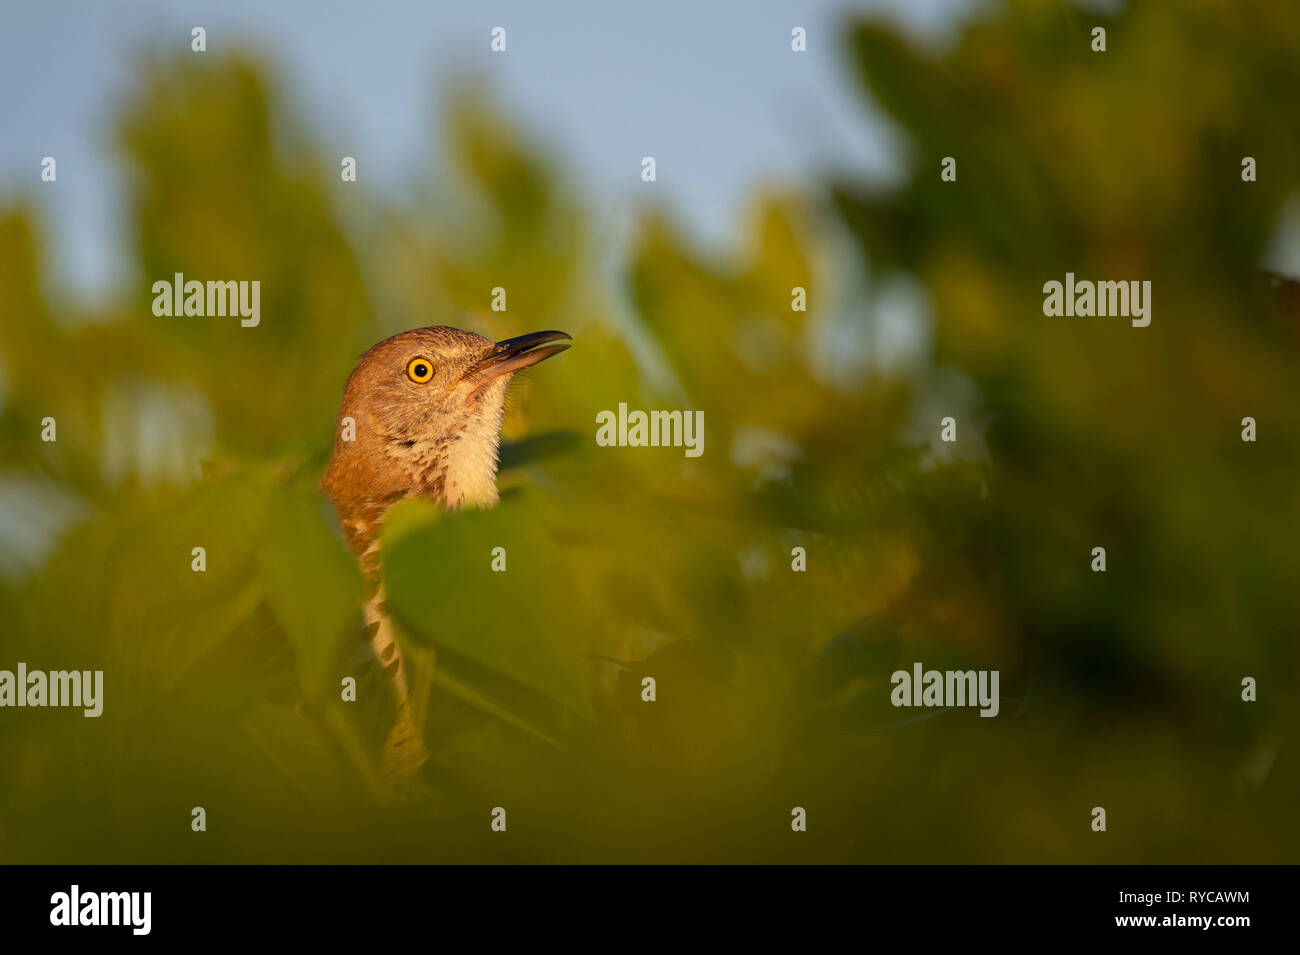 A Brown Thrasher peeks its head out of a green leafy bush in the early morning sun to show off its bright yellow eye. Stock Photo